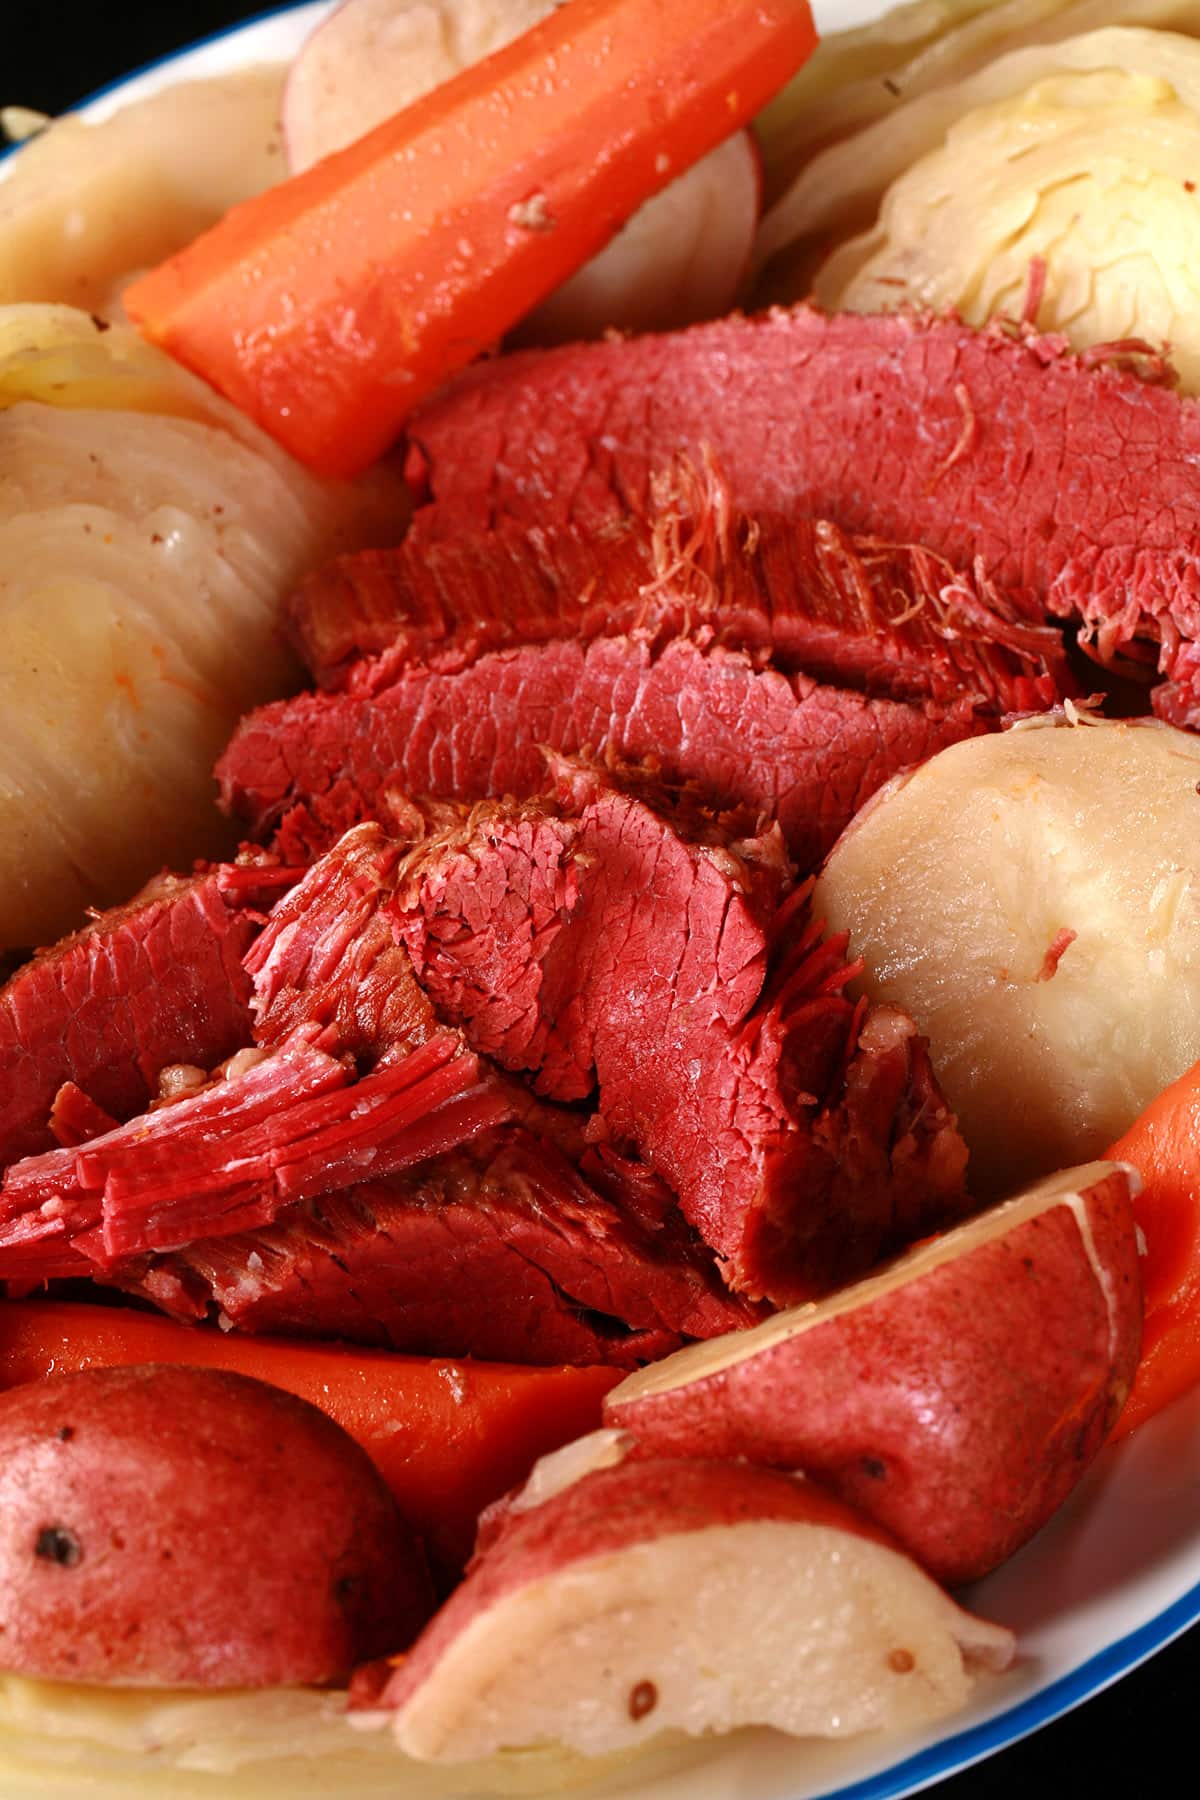 A close up view of some homemade corned beef brisket, nestled among boiled cabbage, carrots, and potatoes.